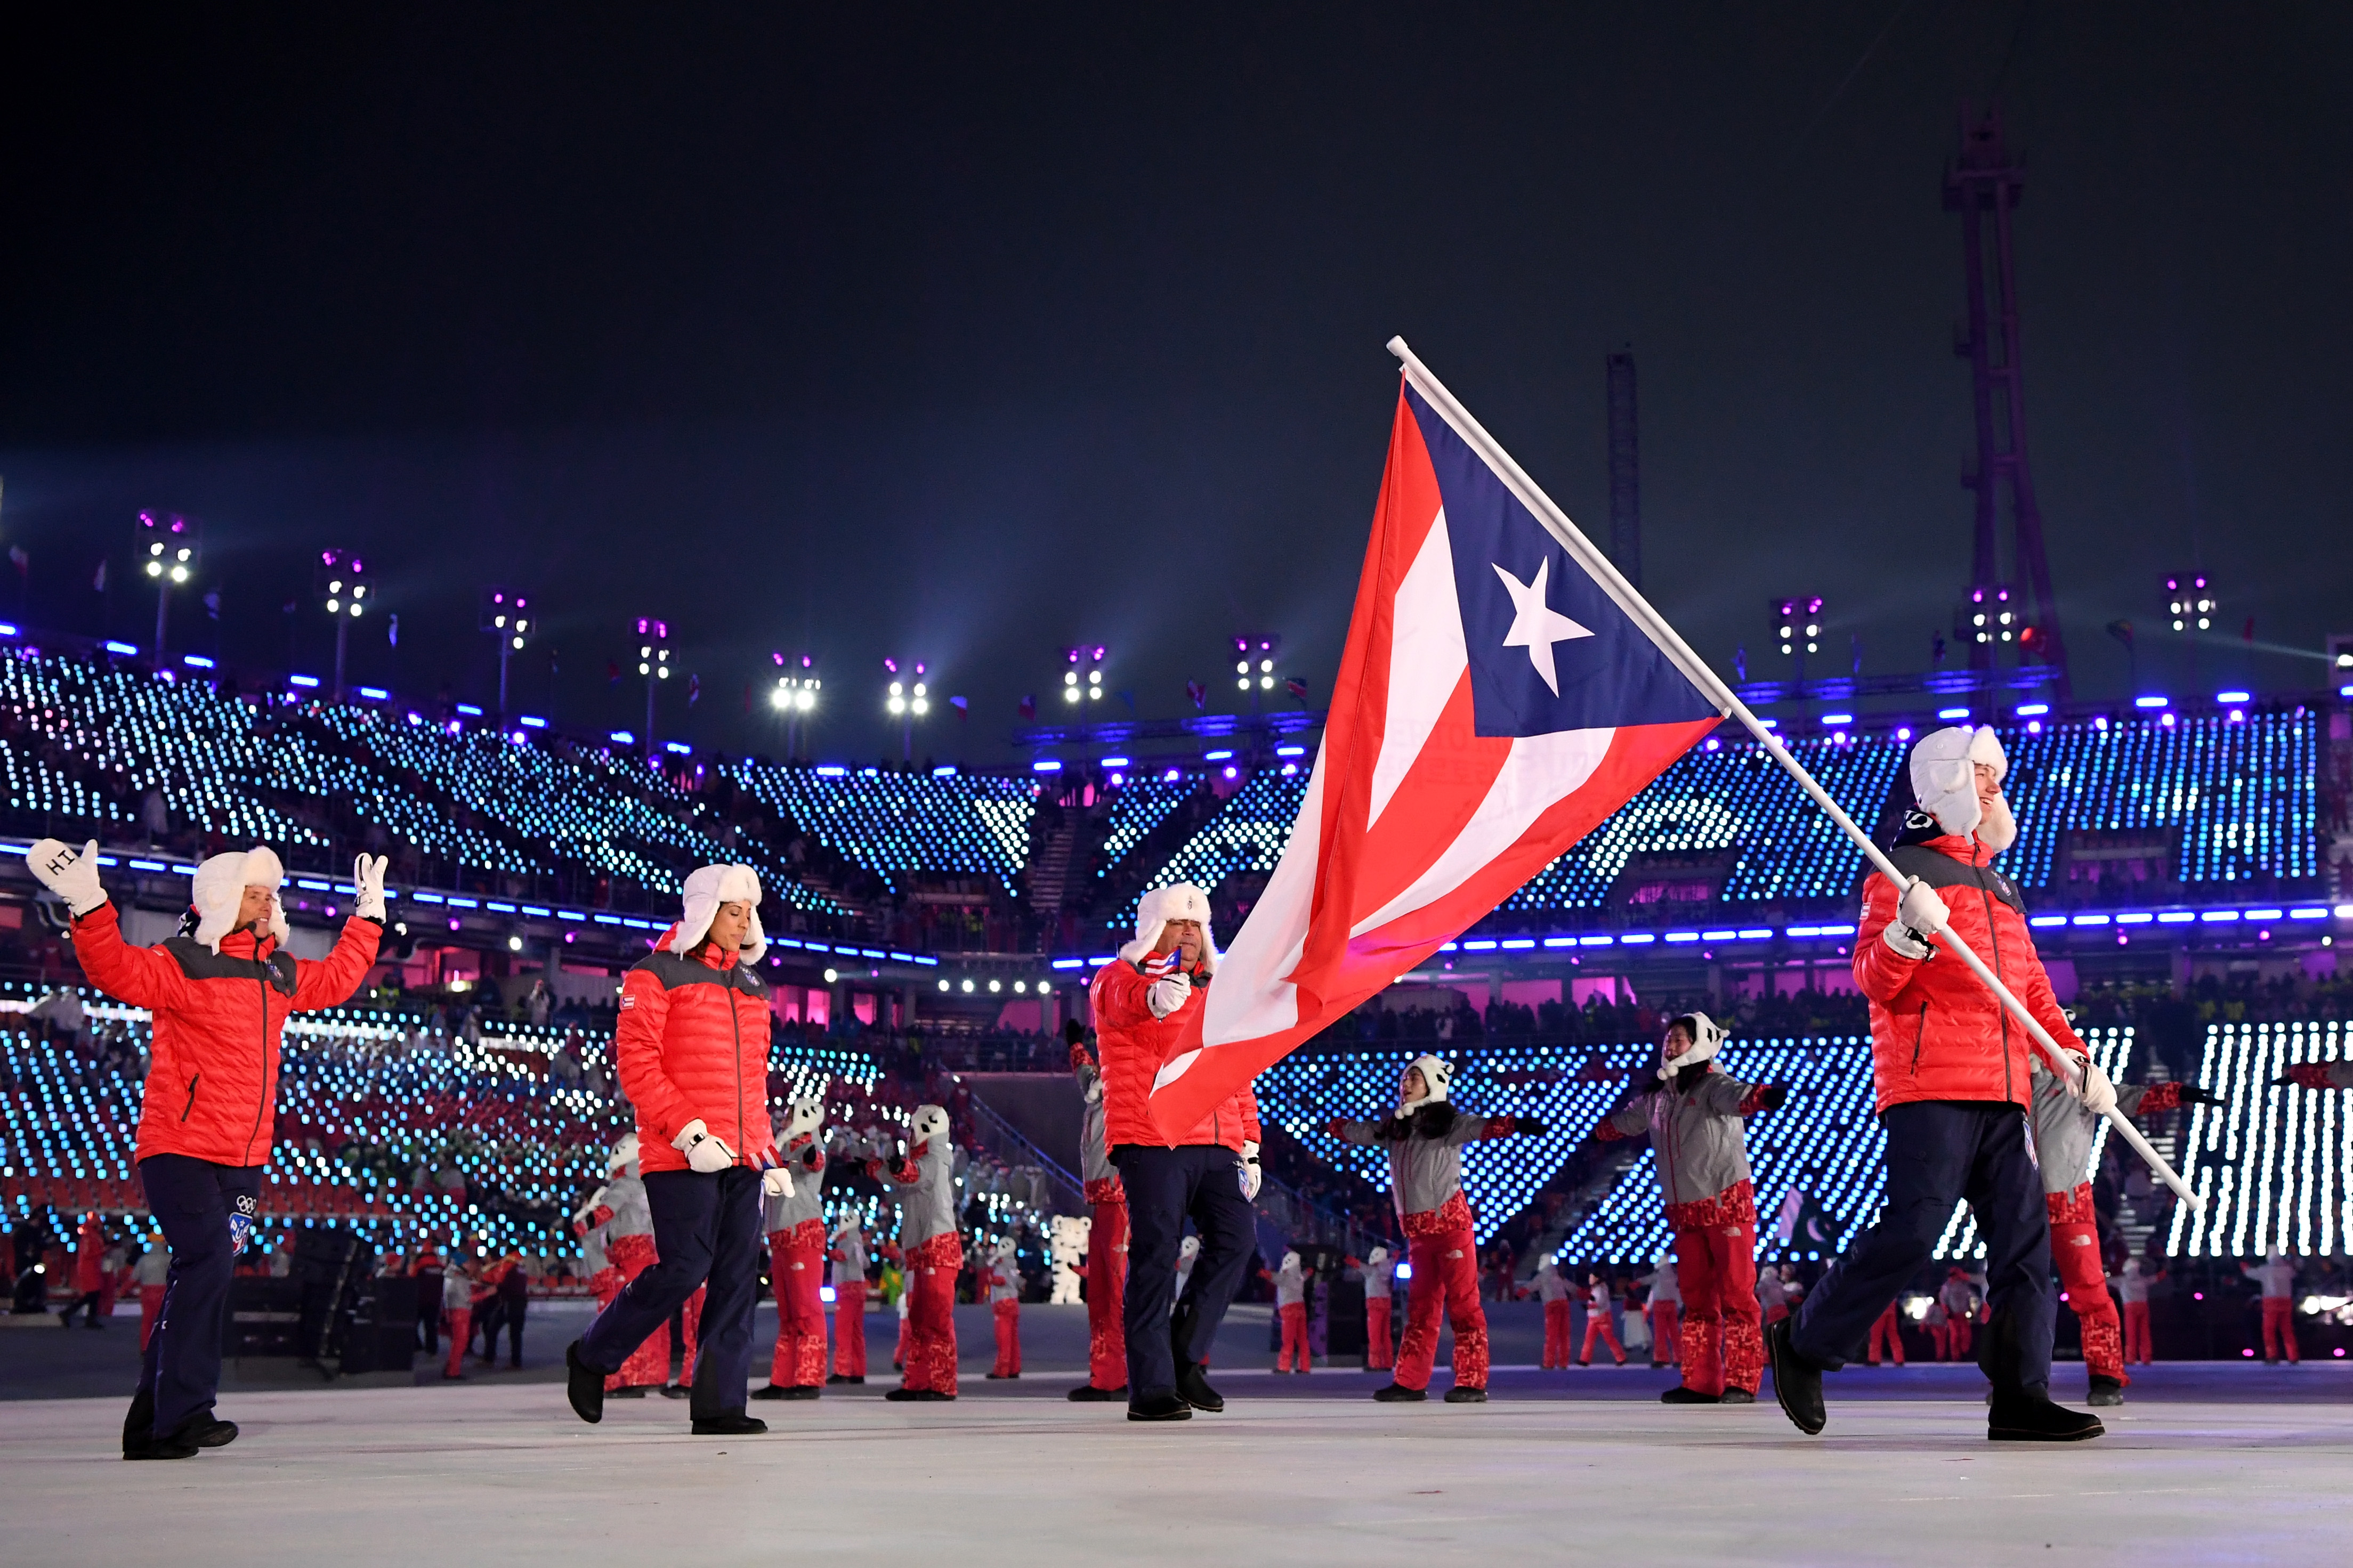 Flag bearer Charles Flaherty of Puerto Rico and teammates arrive at the stadium during the Opening Ceremony of the PyeongChang 2018 Winter Olympic Games at PyeongChang Olympic Stadium on February 9, 2018 in Pyeongchang-gun, South Korea. (Matthias Hangst&mdash;Getty Images)